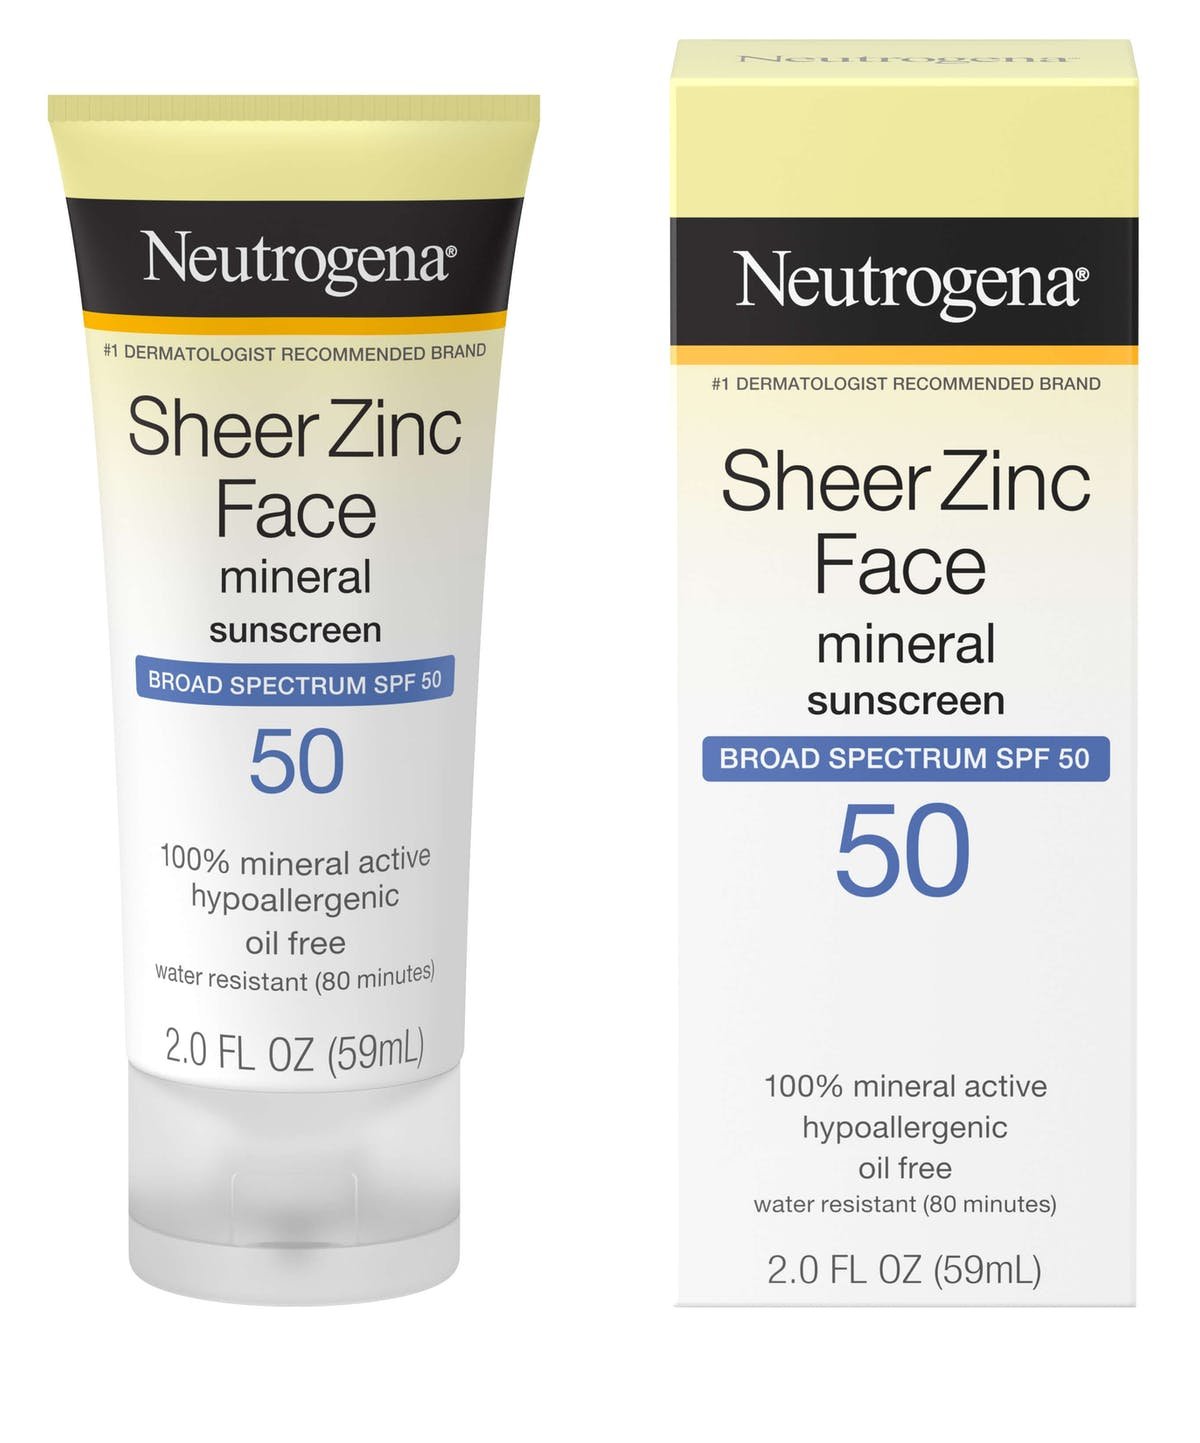 Neutrogena Sheer Zinc Dry-Touch Face Sunscreen With SPF 50, 2 Fl. Oz, 6-Pack - image 4 of 7